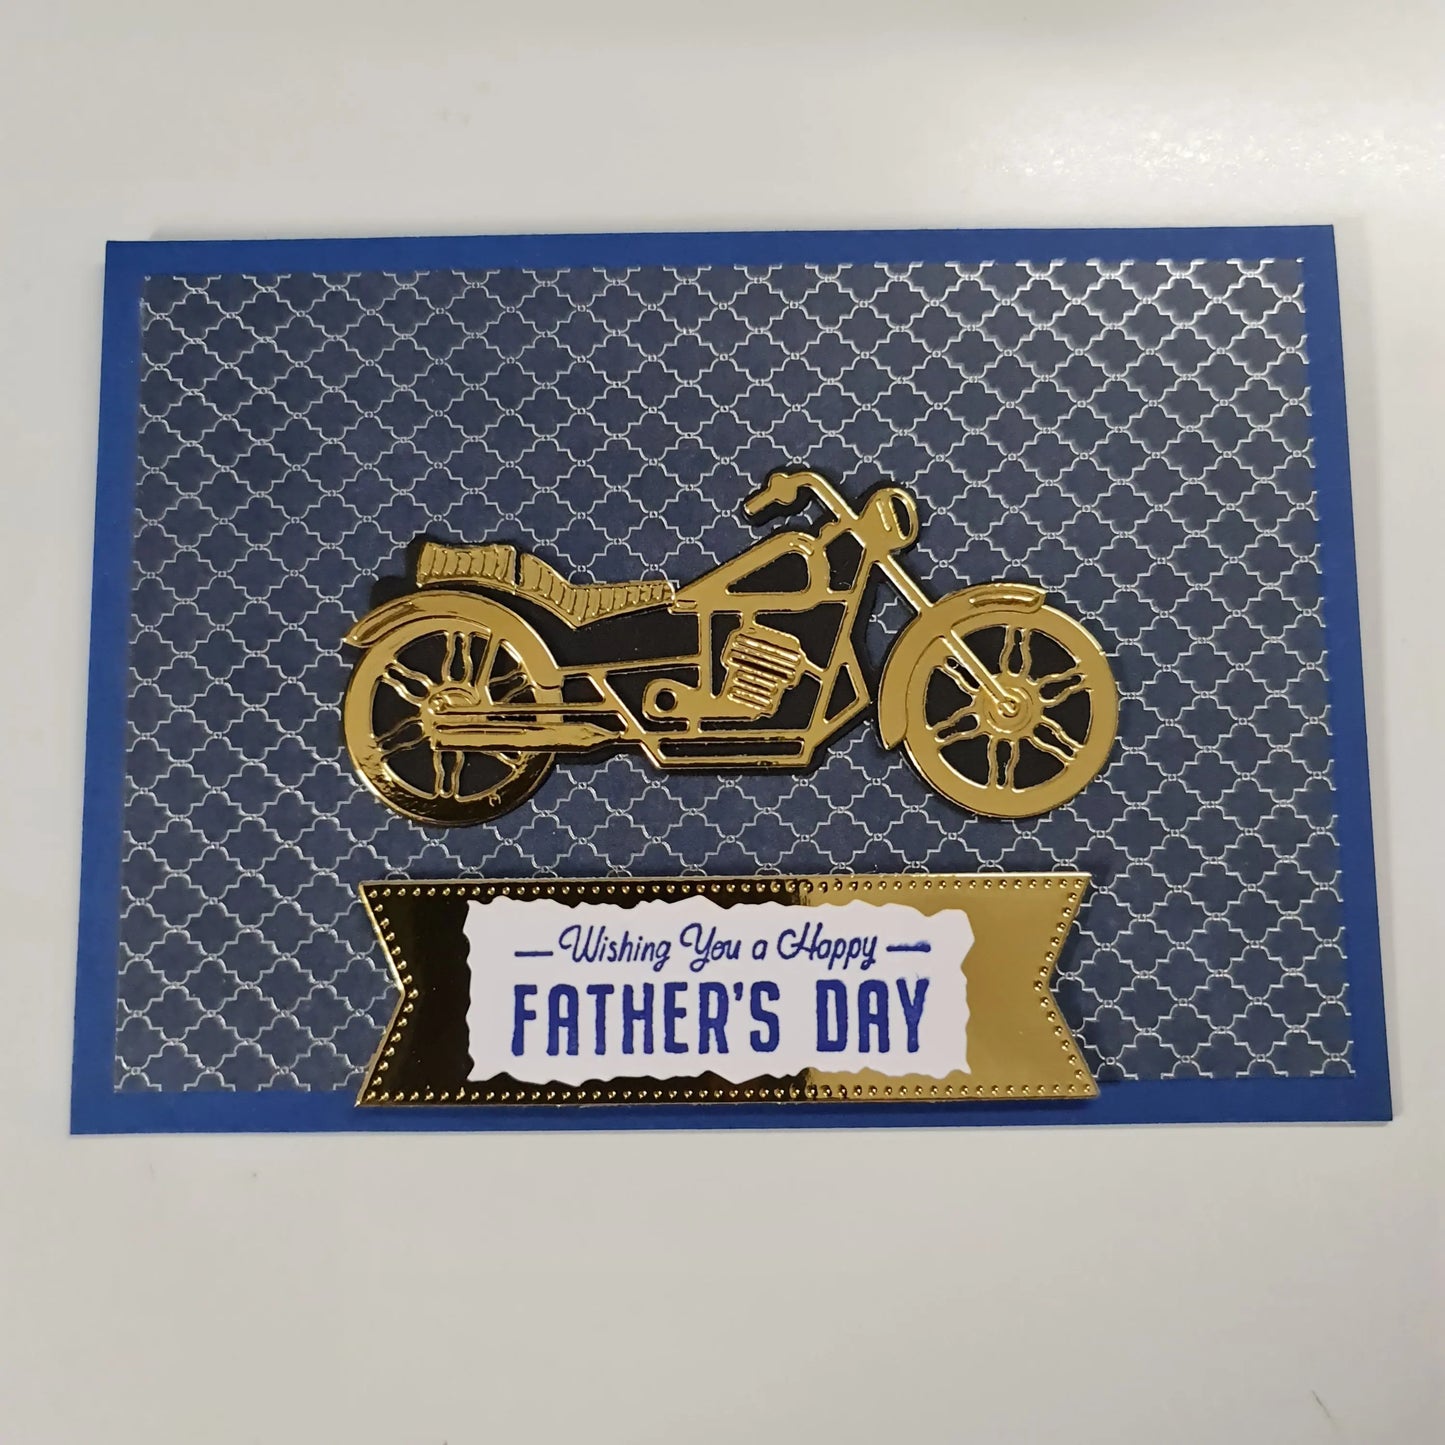 Gold Motorbike Father's Day Cards Paper Love Cards